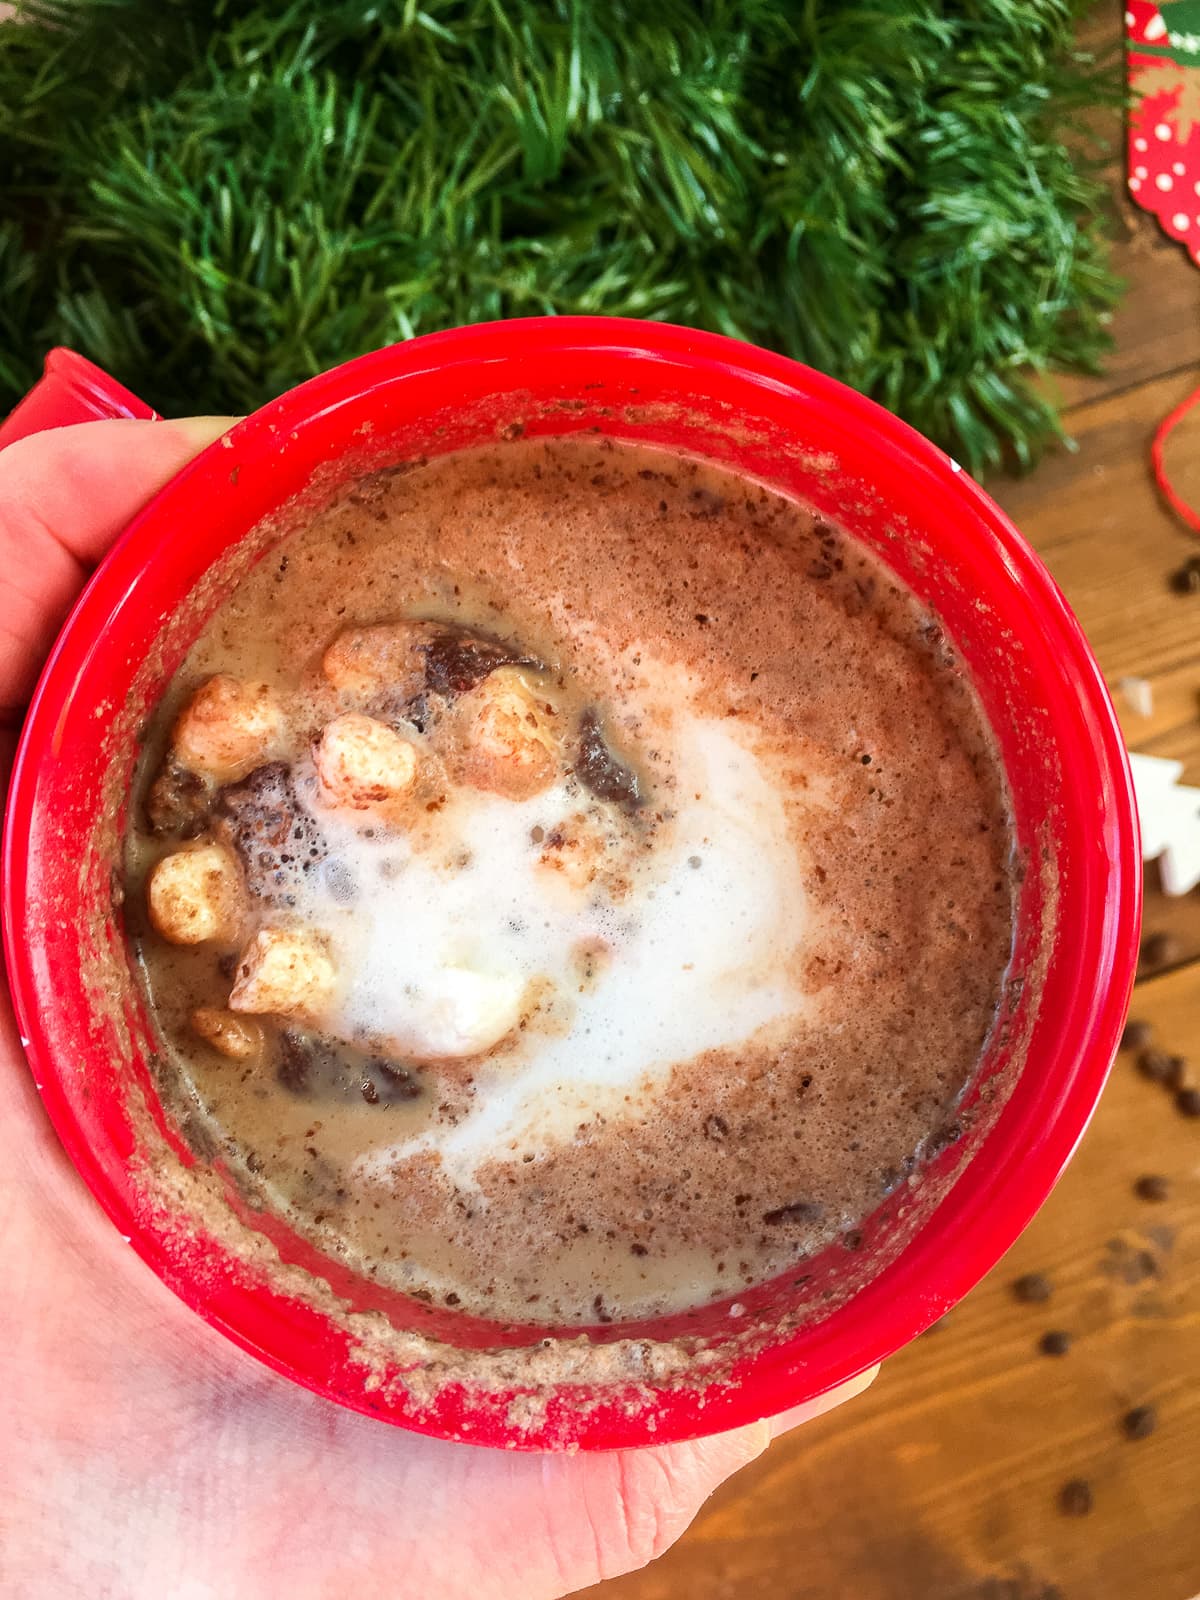 A zoomed out image of a hand holding a red mug of hot cocoa with green garland in the background.